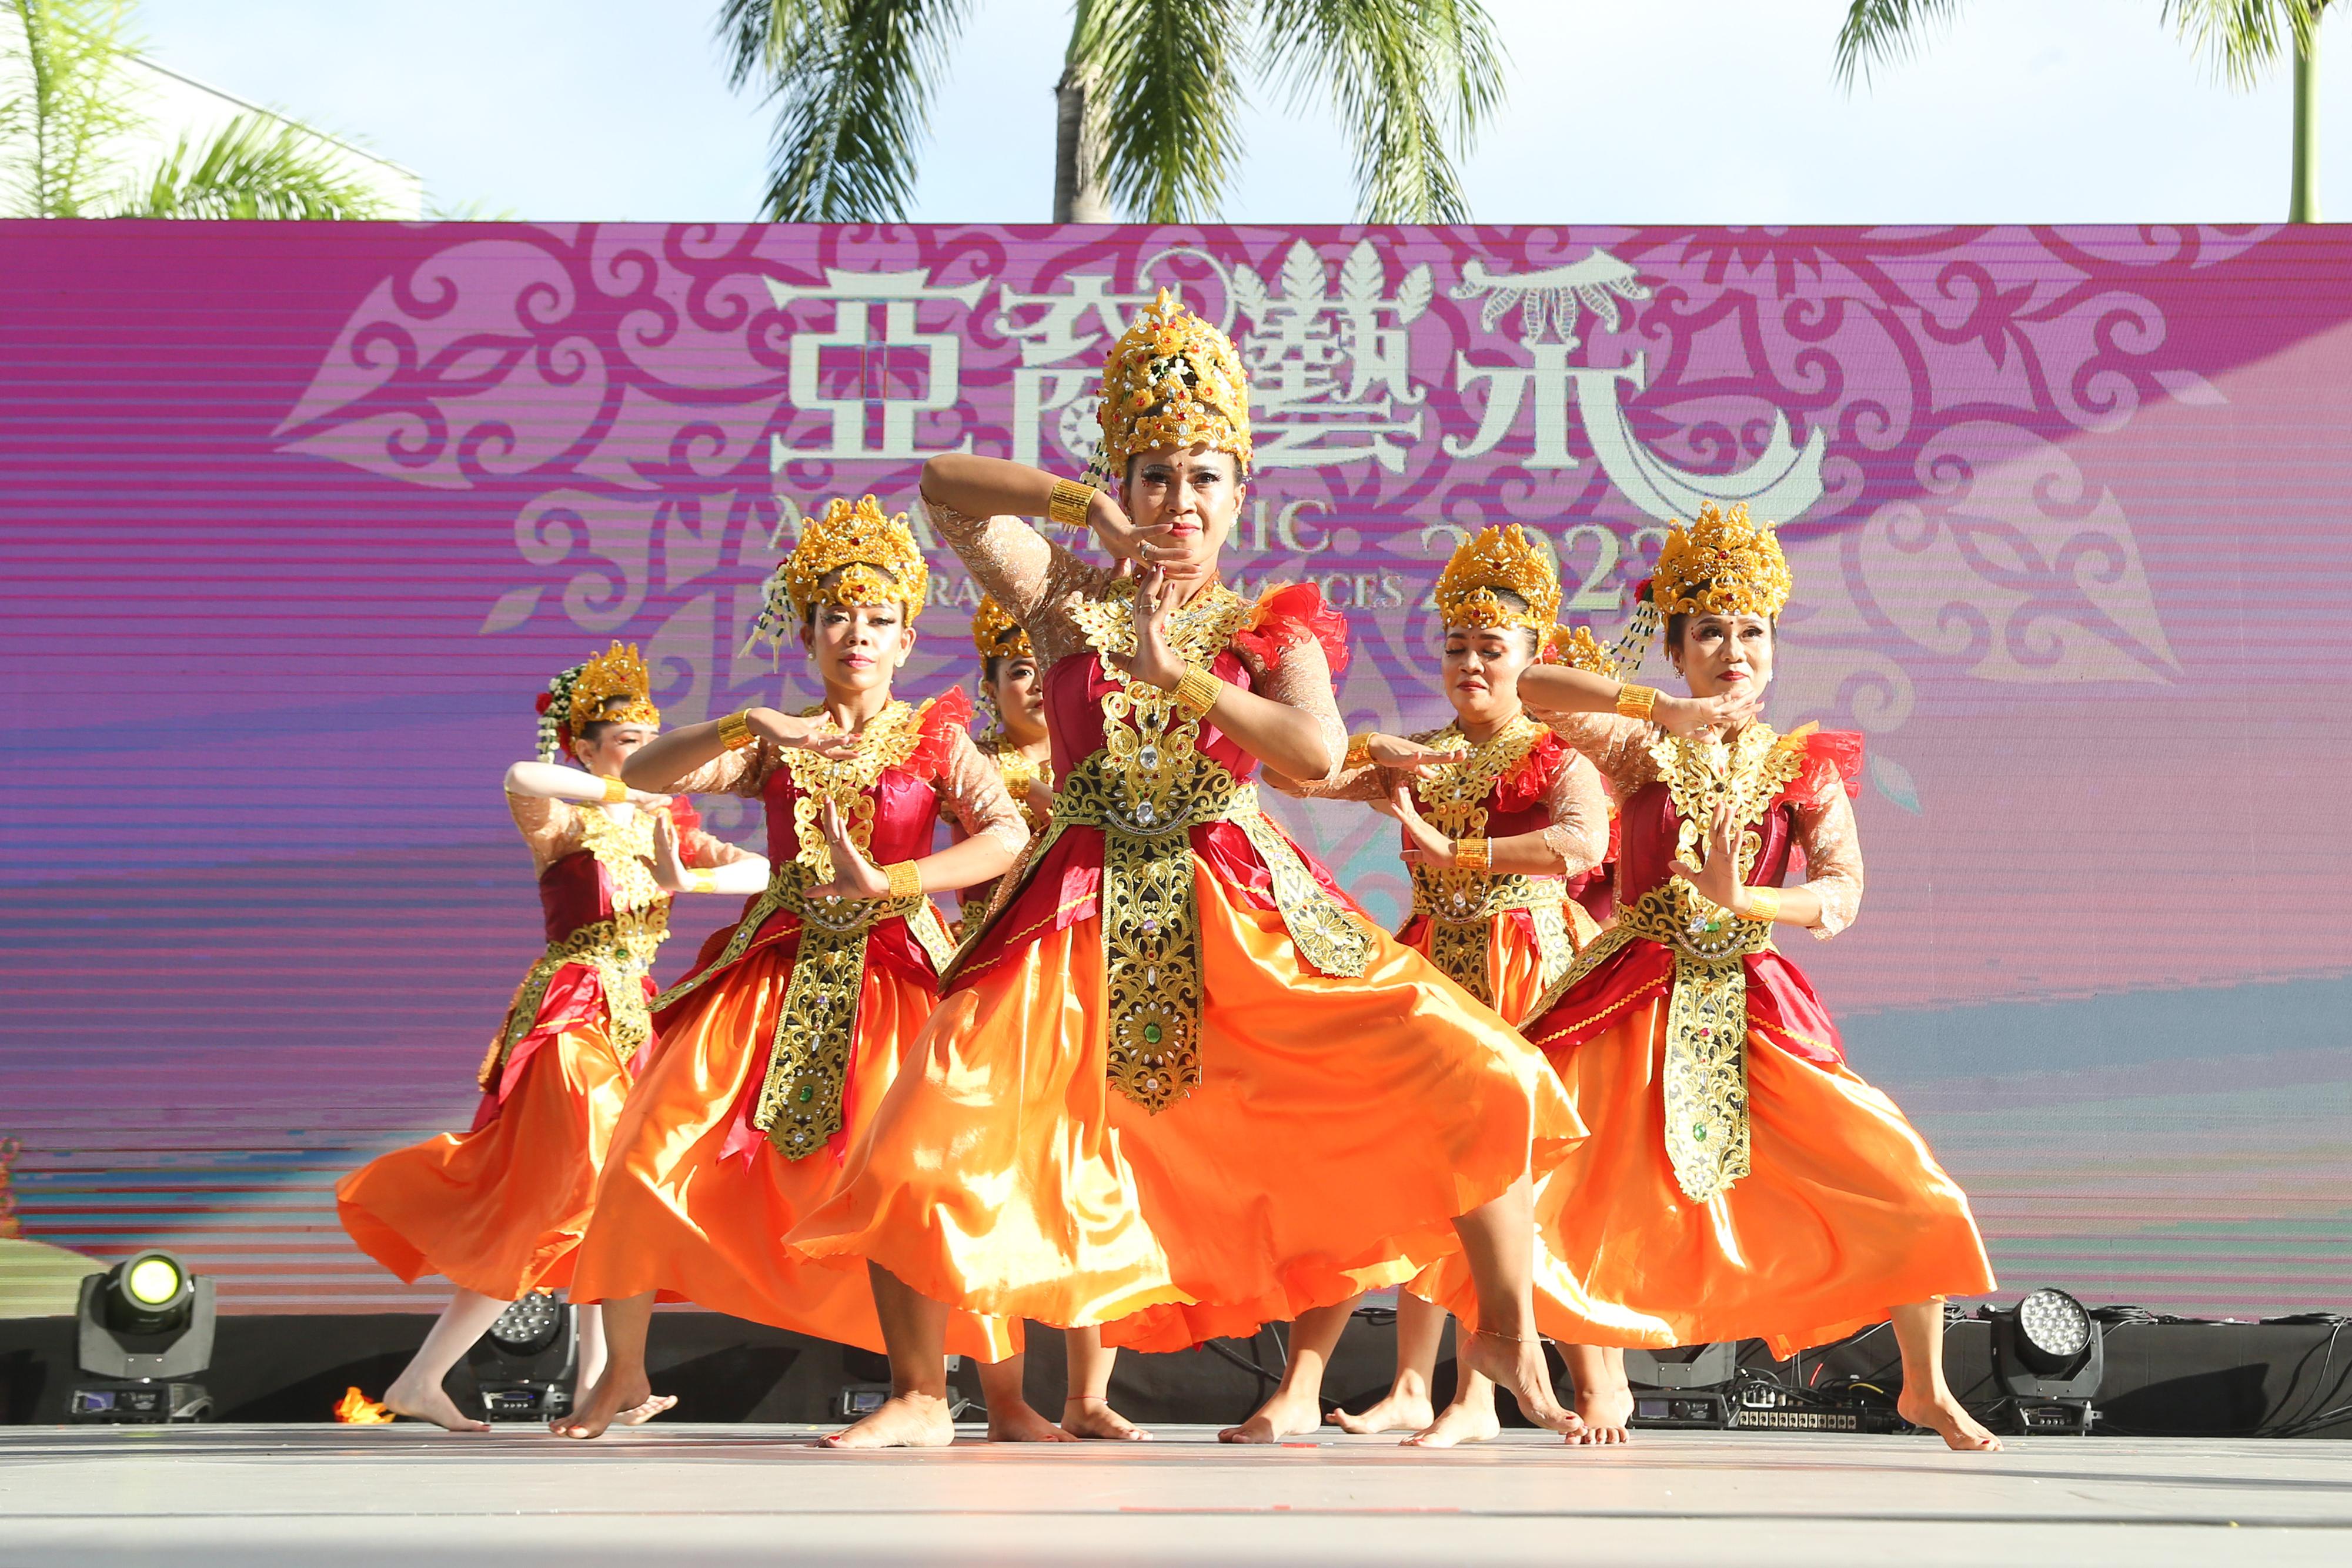 The Leisure and Cultural Services Department held the Asian Ethnic Cultural Performances at the Hong Kong Cultural Centre Piazza this afternoon (November 12), showcasing the arts and cultures of different parts of Asia through a variety of activities including ethnic stage performances, costume and headdress exhibition and fringe activity booths. Photo shows Indonesian dance.